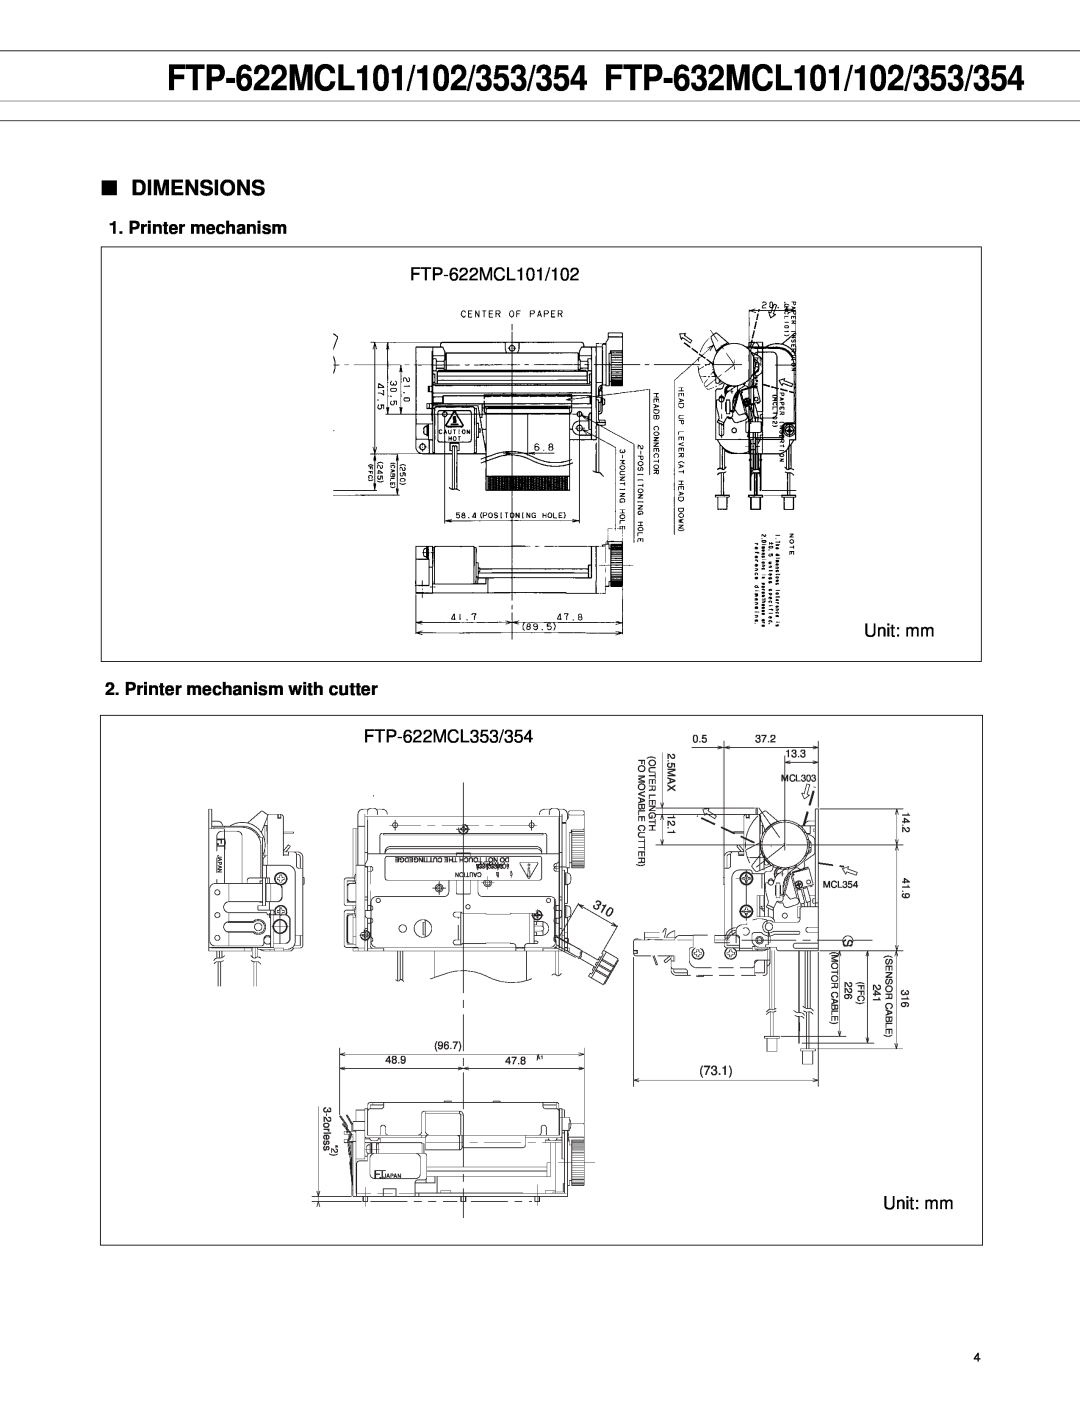 Fujitsu manual Dimensions, Printer mechanism with cutter, FTP-622MCL101/102/353/354 FTP-632MCL101/102/353/354, 73.1 